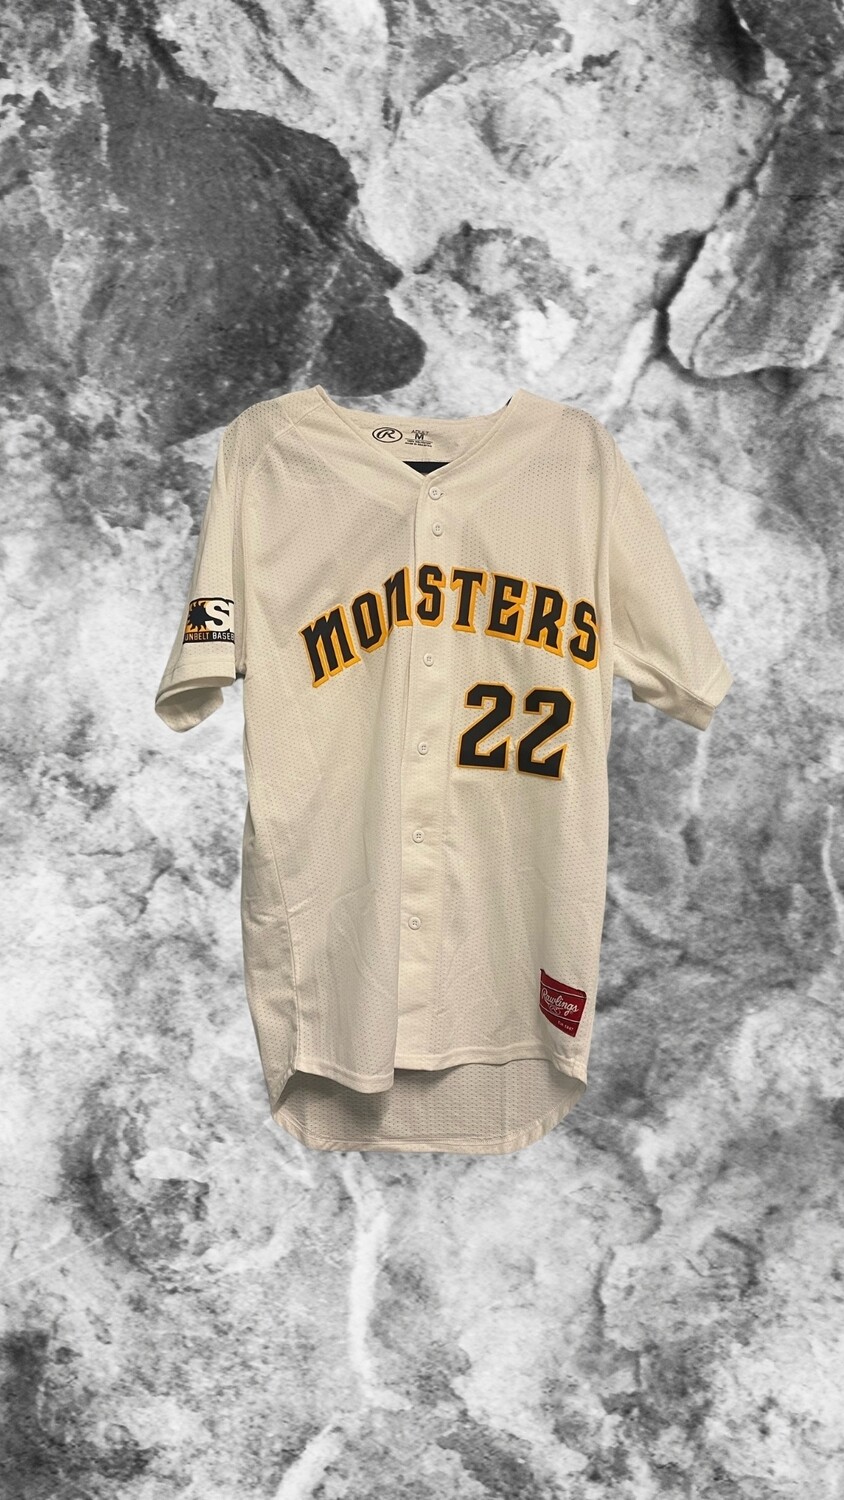 Monsters White Jersey #22